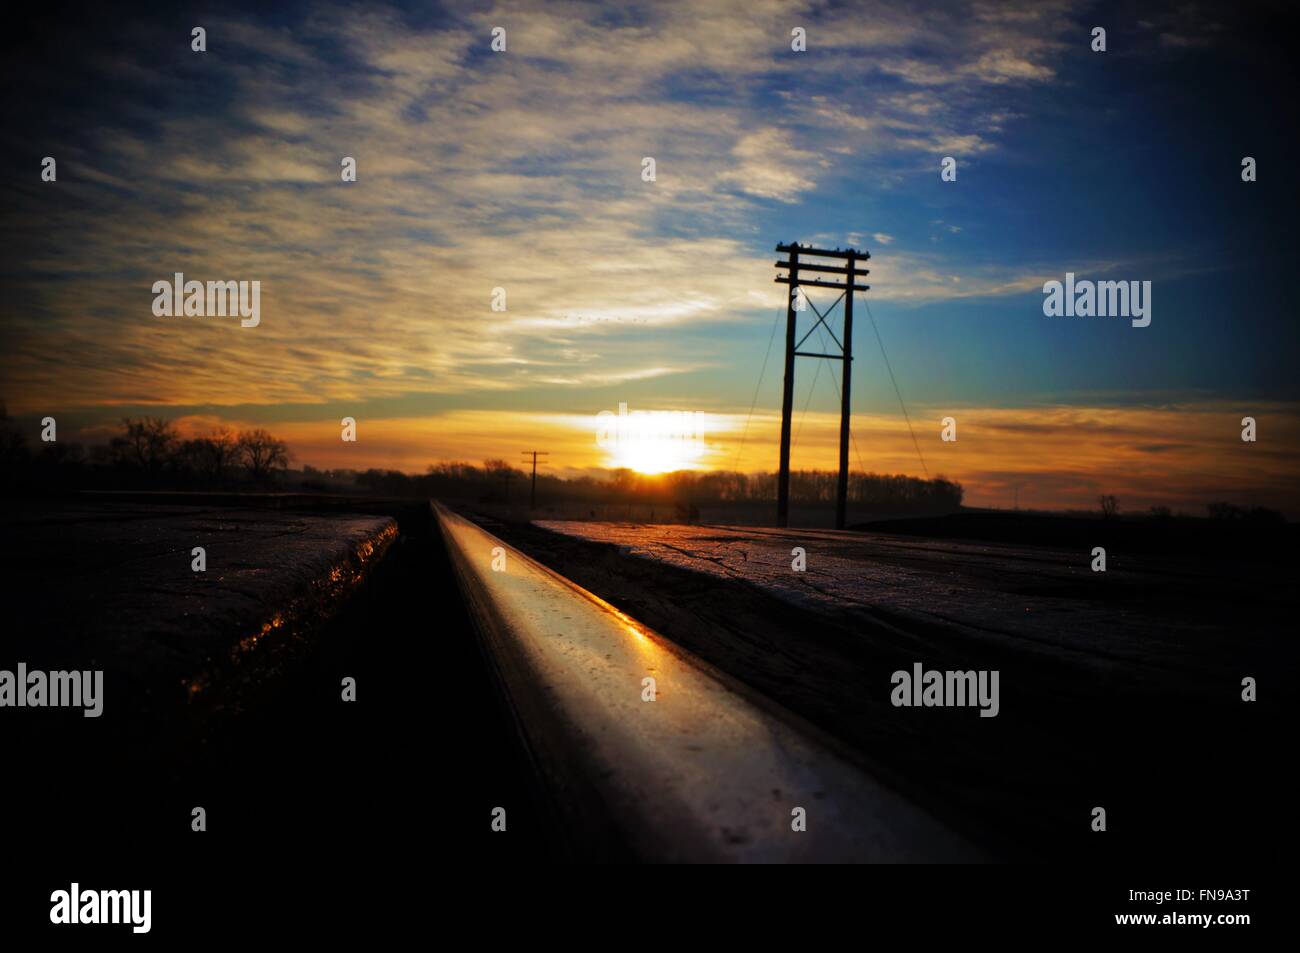 Sunrise with the tracks, warmth of the sun. Johnny Cash would be proud. Stock Photo